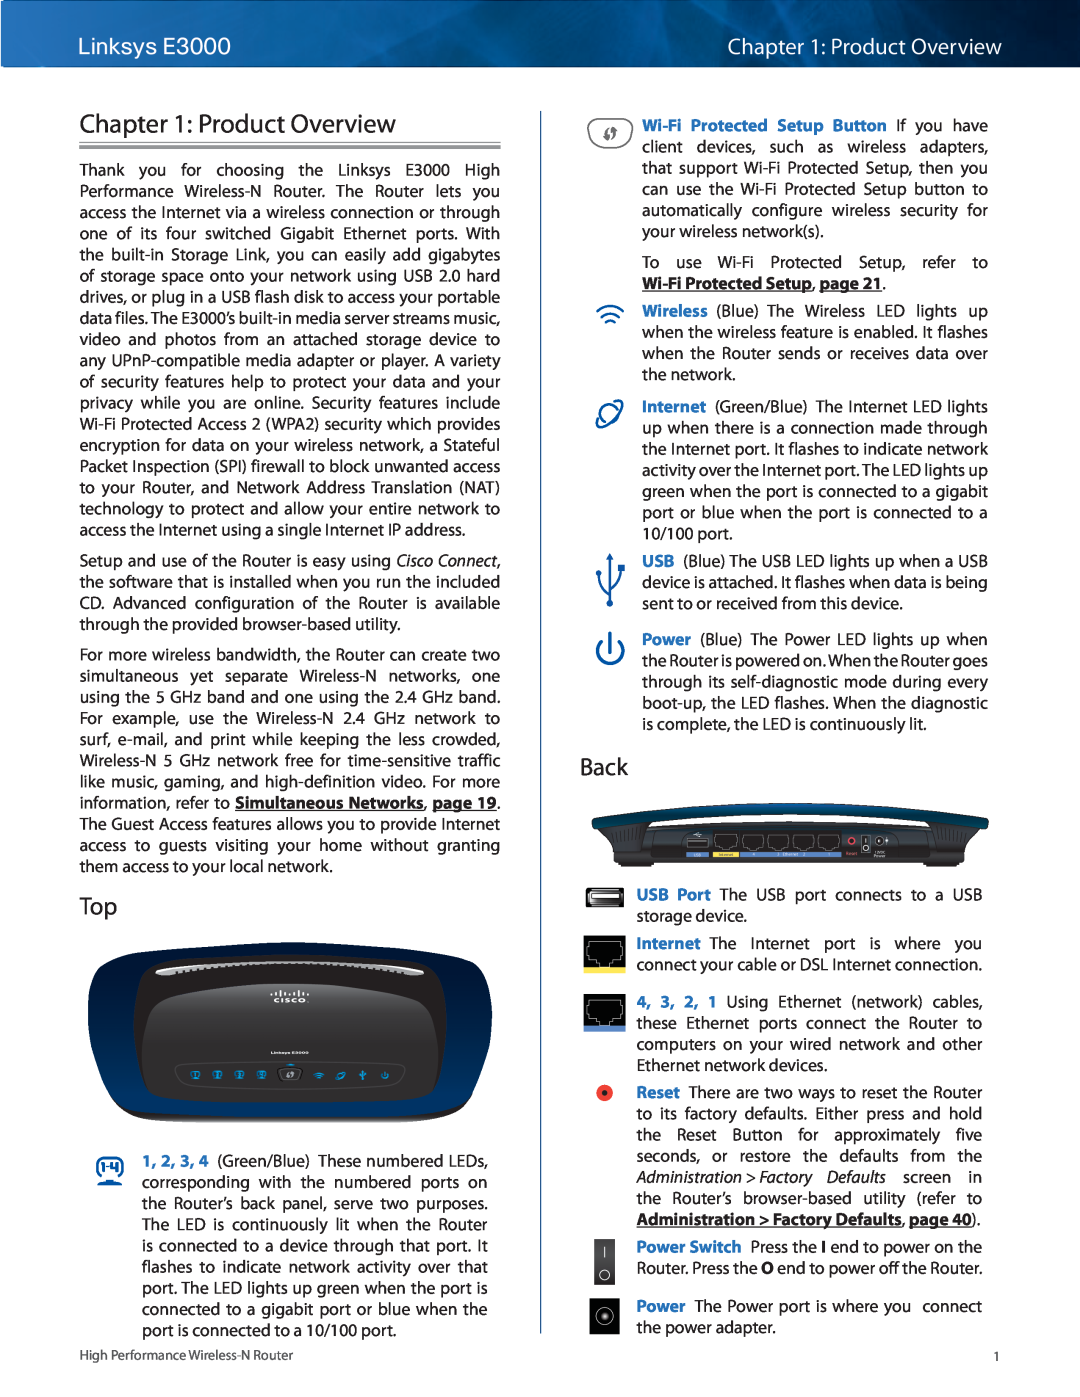 Linksys manual Product Overview, Back, Linksys E3000 